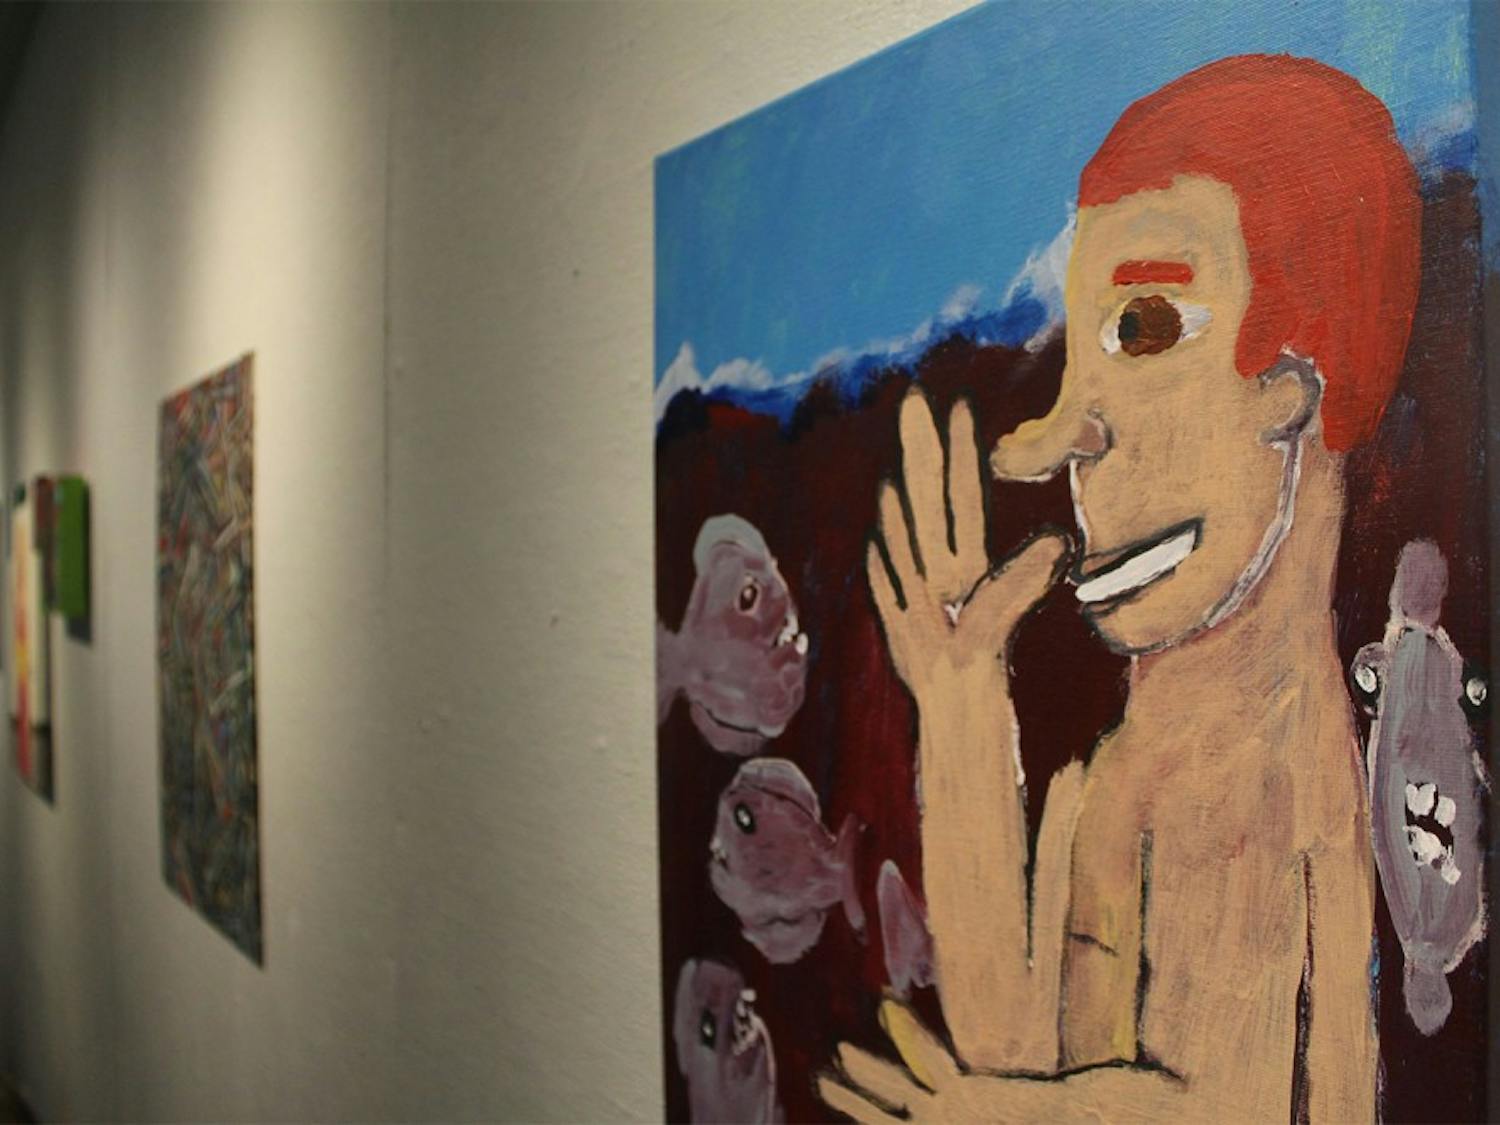 New exhibit in the Student Union of art created by the mentally ill